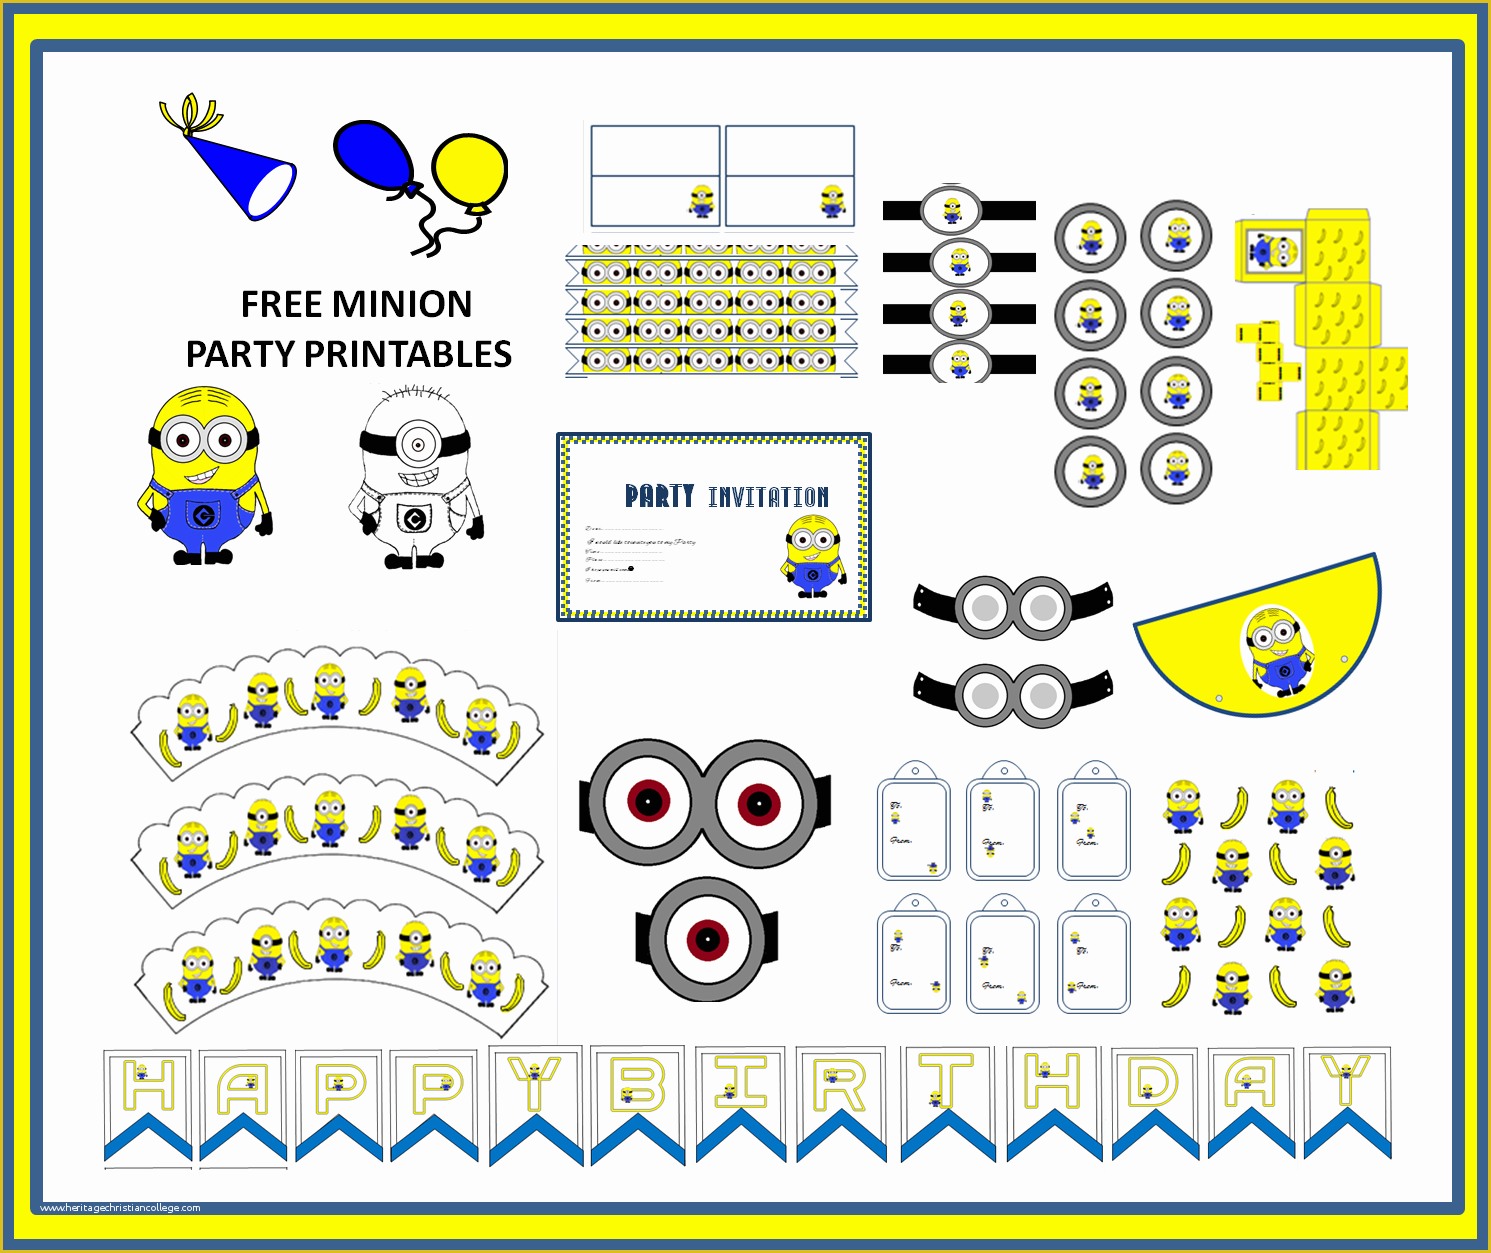 Free Blogger Template Maker Of the Art Bug Free Minion themed Party Printables